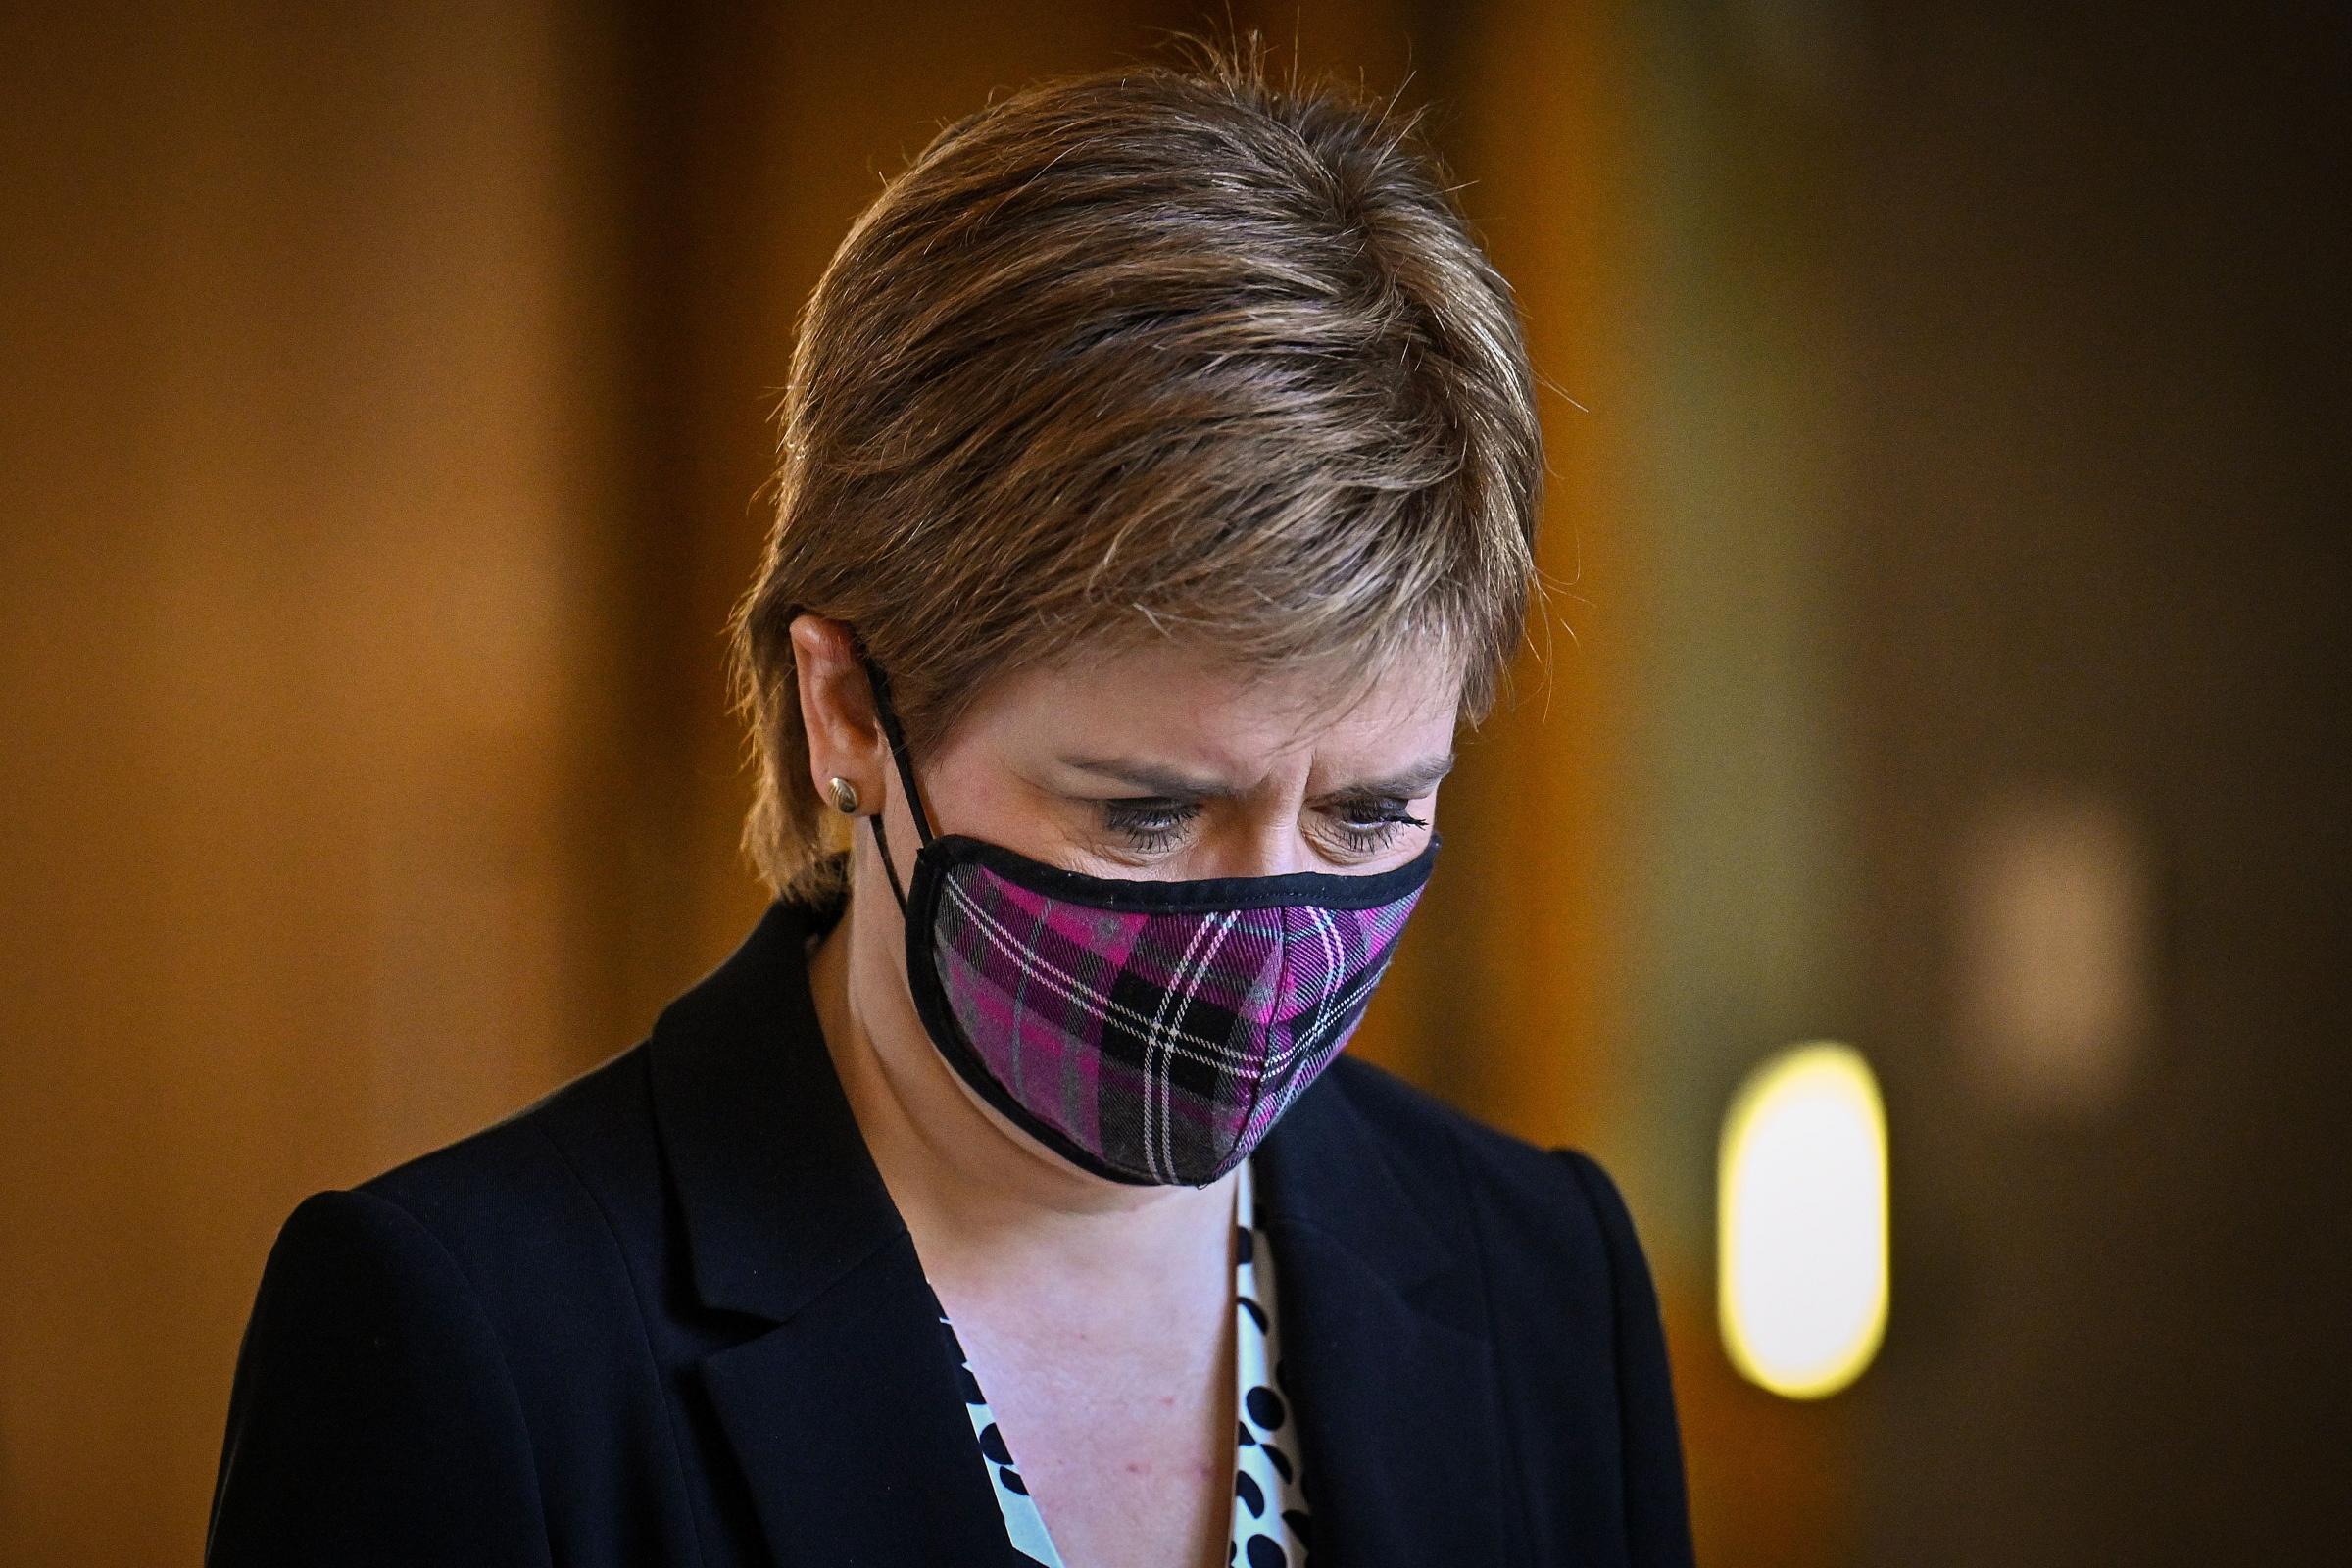 Covid: What did Nicola Sturgeon say in her briefing on Thursday?